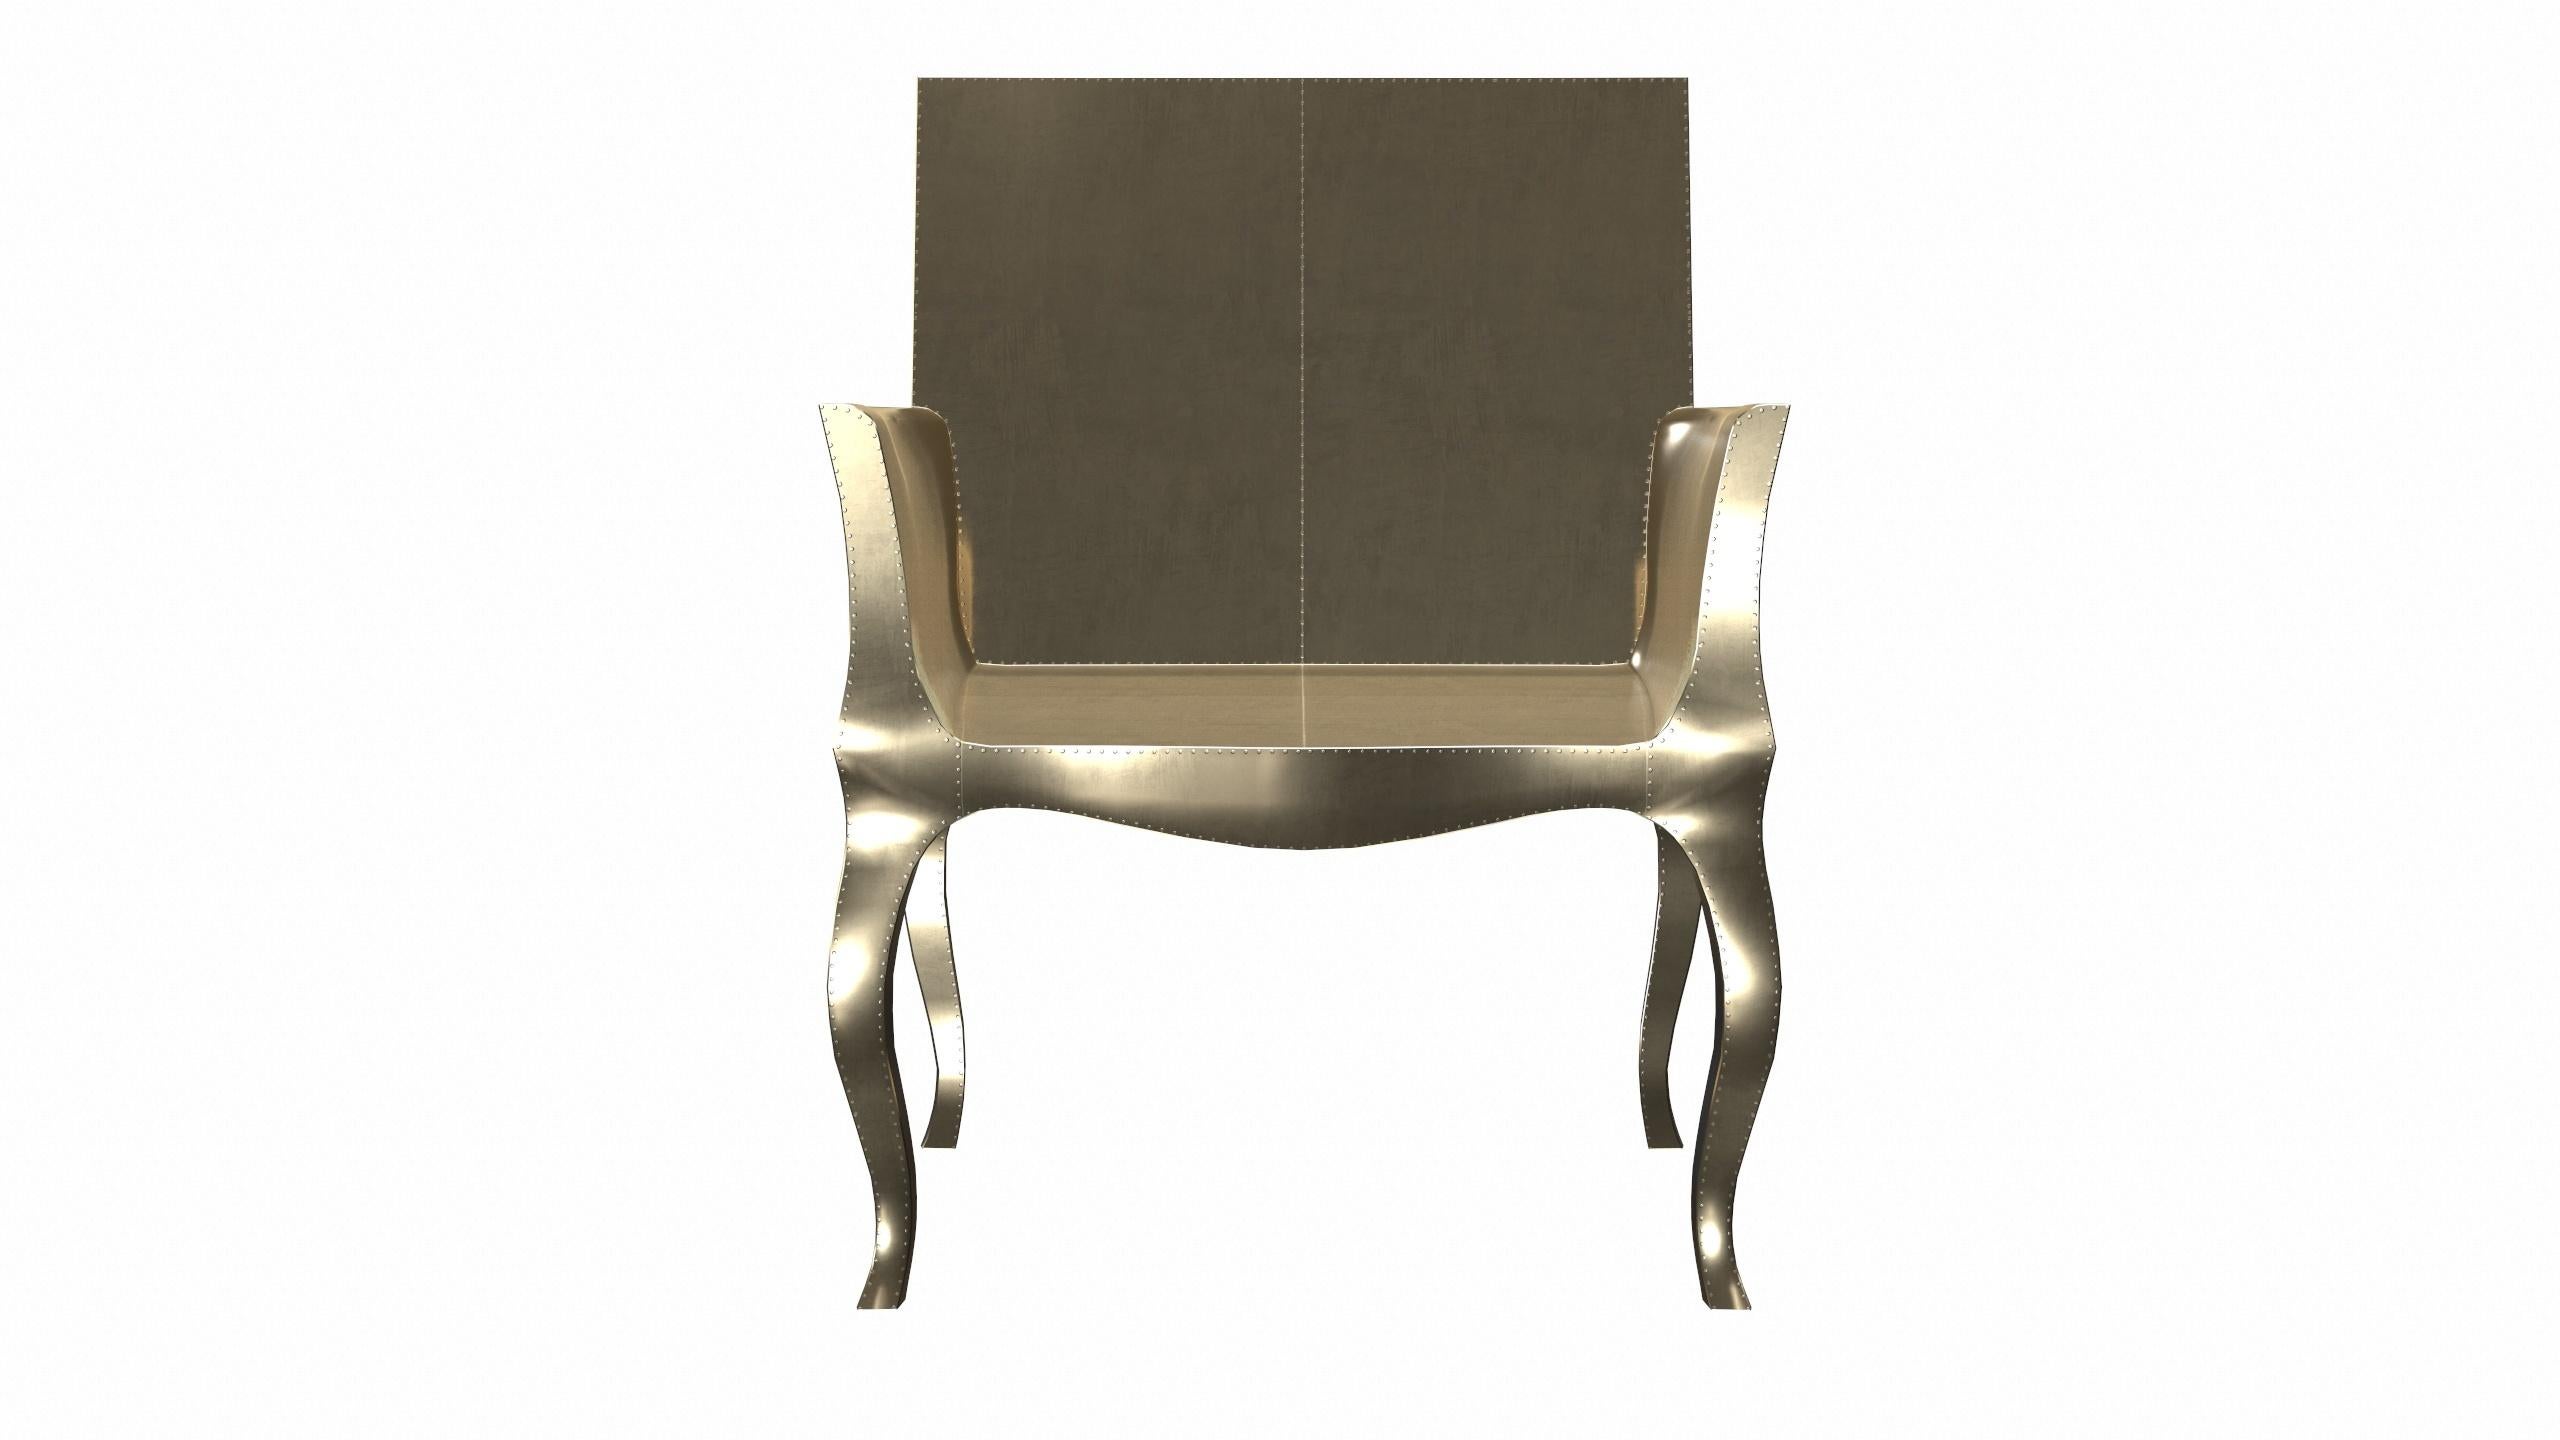 Indian Art Deco Side Chairs in Smooth Brass by Paul Mathieu for S. Odegard For Sale